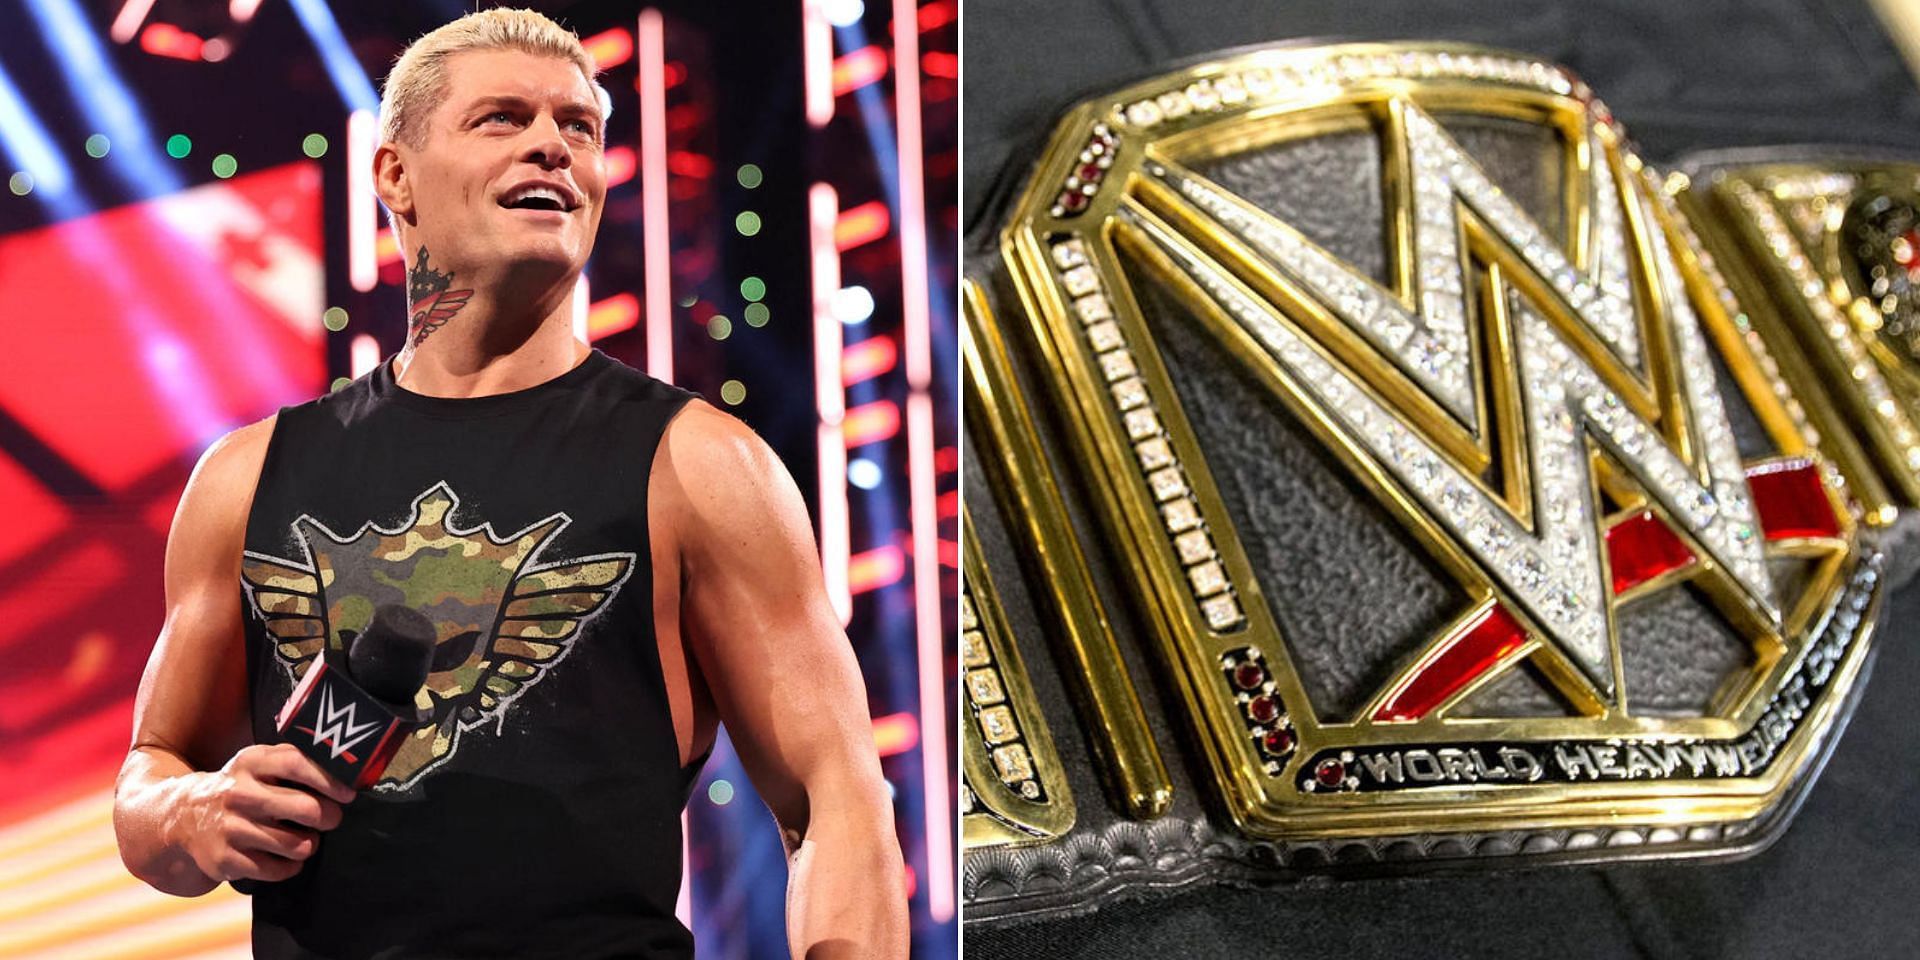 Cody Rhodes wants to face his former rival again